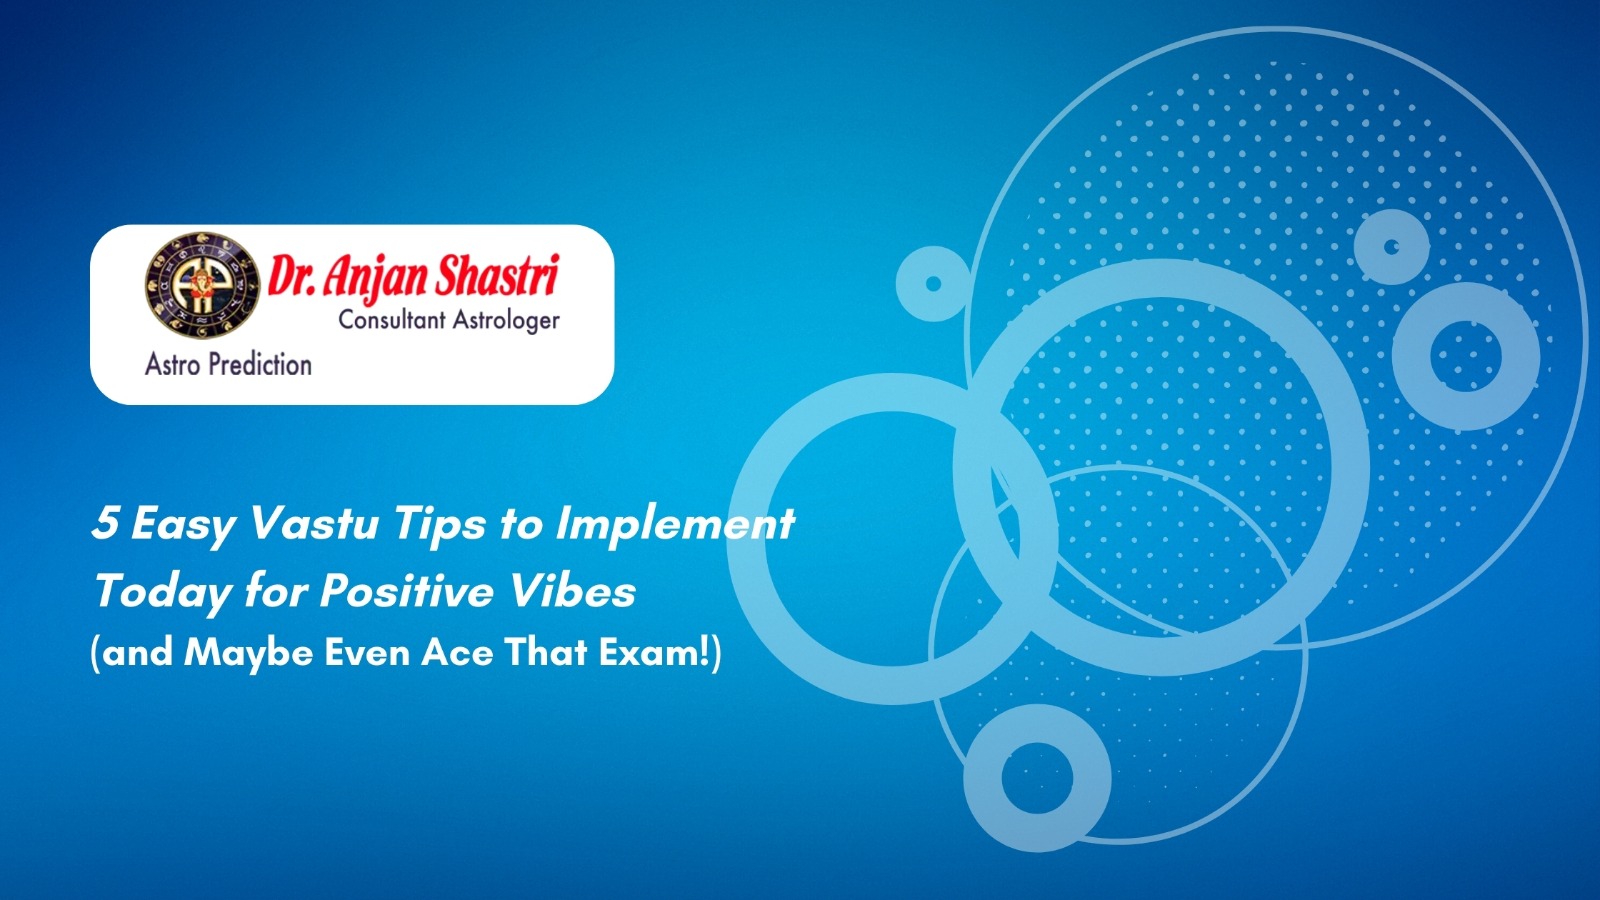 5 Easy Vastu Tips to Implement Today for Positive Vibes (and Maybe Even Ace That Exam!)